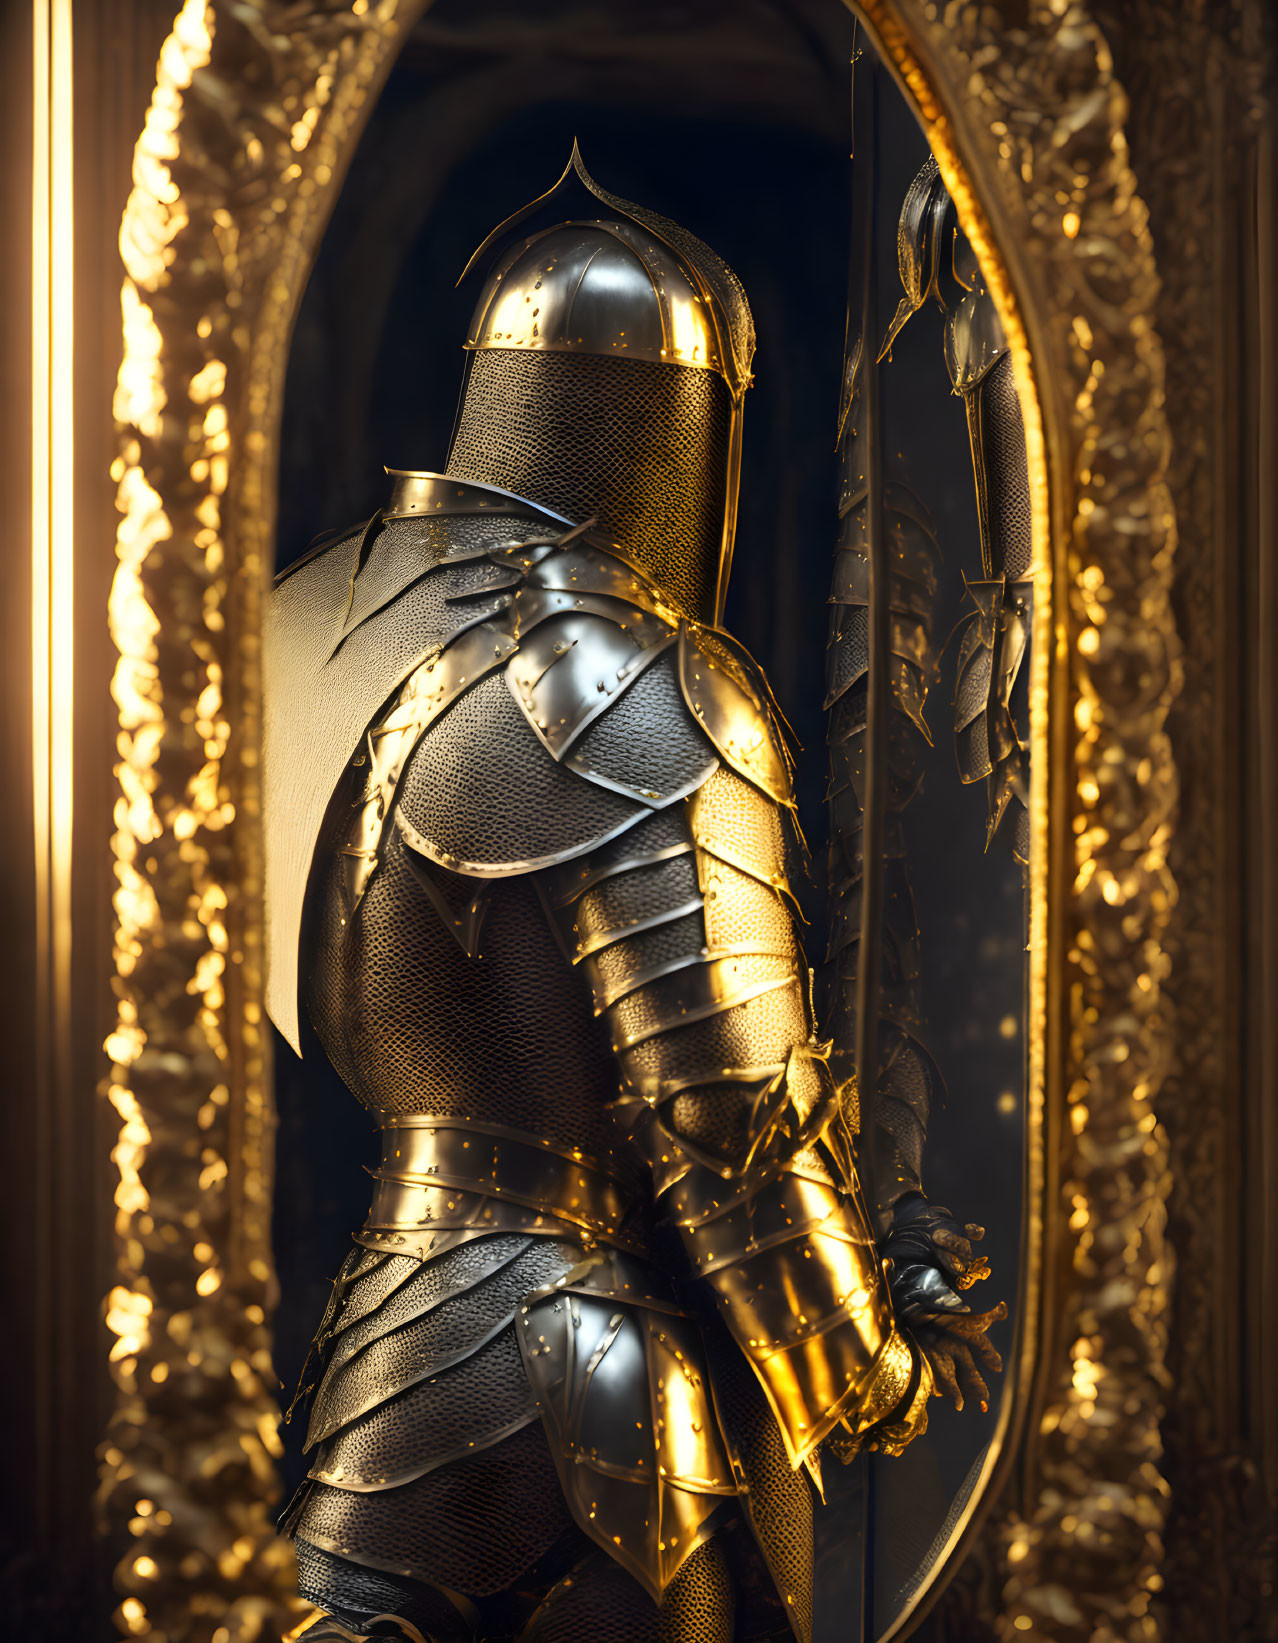 Knight in Shining Armor Stands Beside Ornate Mirror